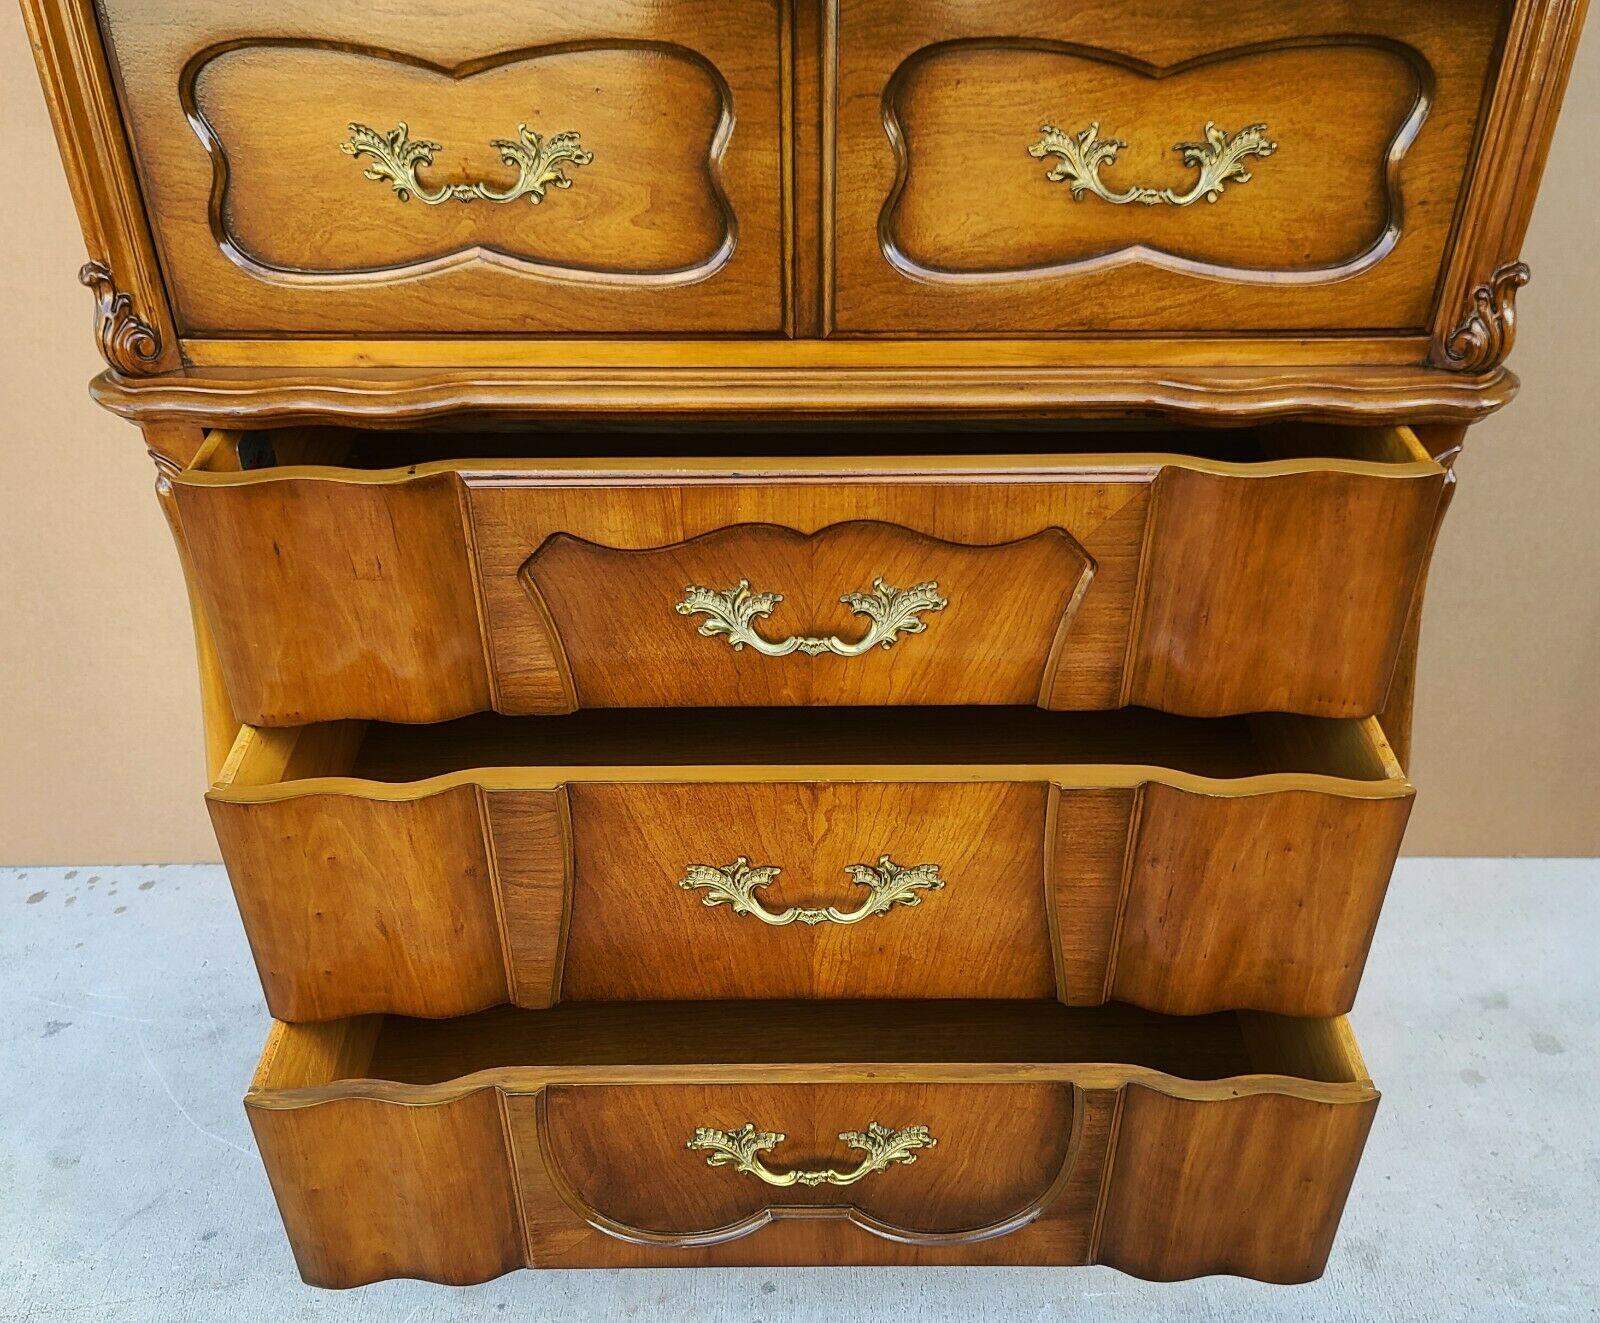 Louis XV French Provincial Sculptural Highboy Dresser by Daniel Jones In Good Condition For Sale In Lake Worth, FL